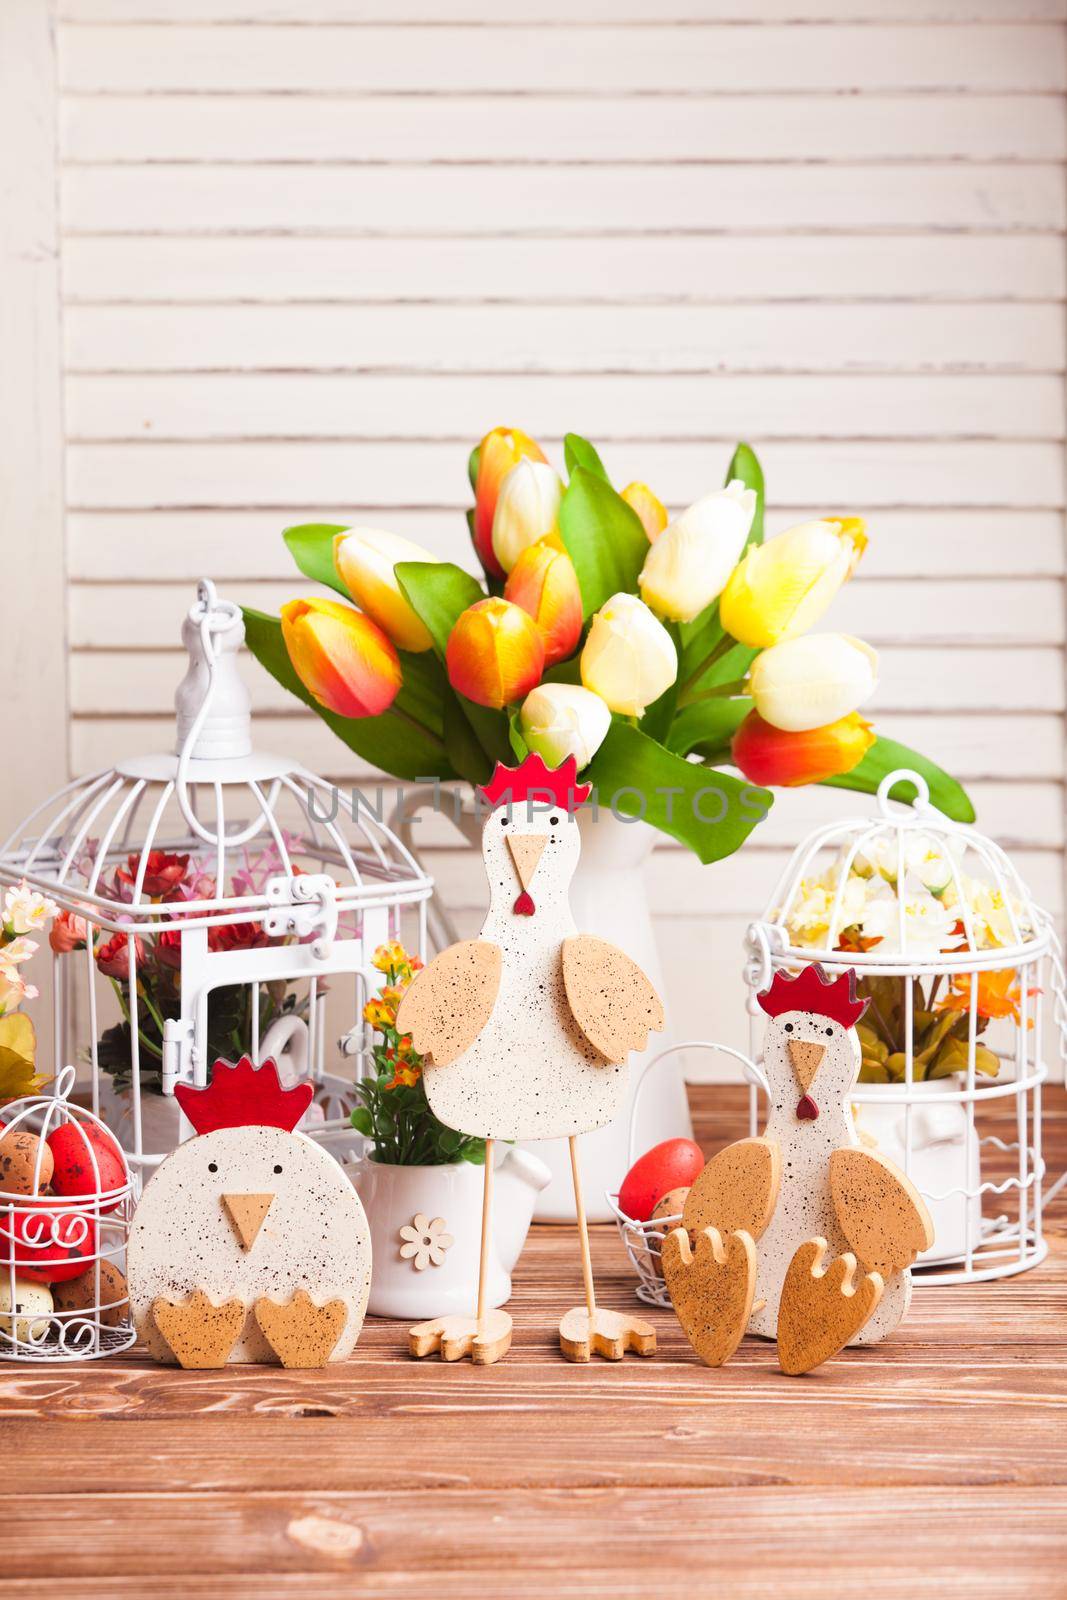 Wooden chickens figures - Easter decorations on the table